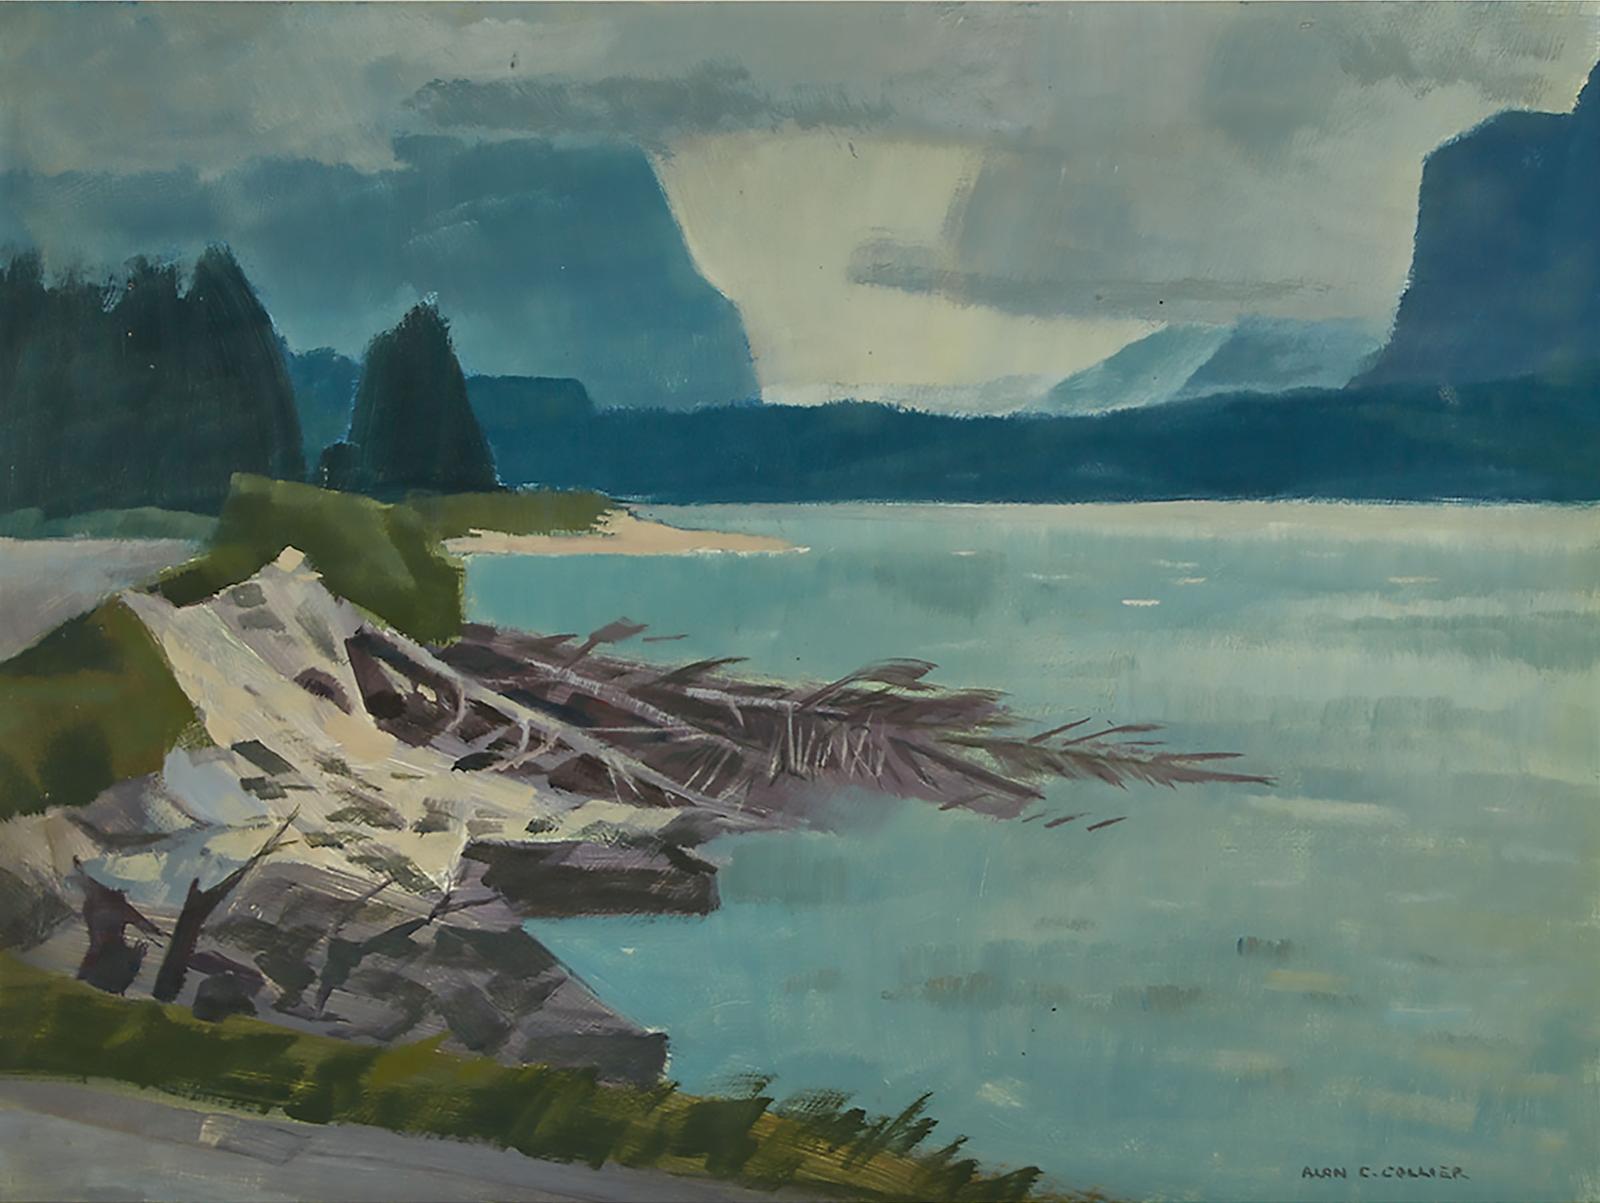 Alan Caswell Collier (1911-1990) - Around The Inlet, Lutak Inlet, Haines, Alaska